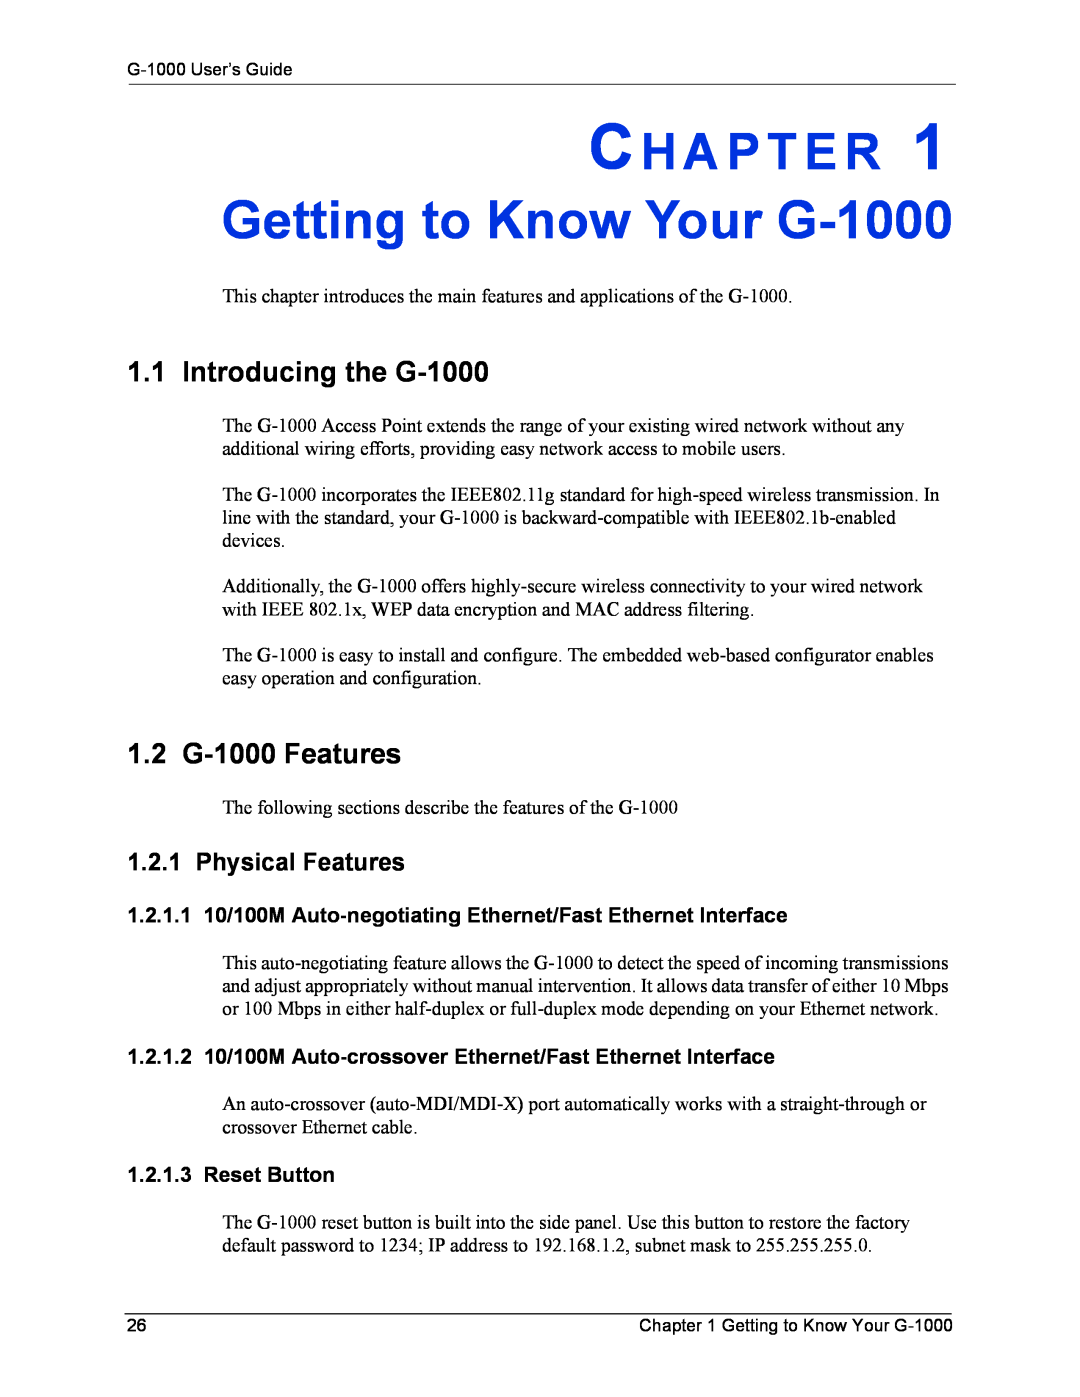 ZyXEL Communications manual Getting to Know Your G-1000, Ch A P T E R, Introducing the G-1000, 1.2 G-1000 Features 